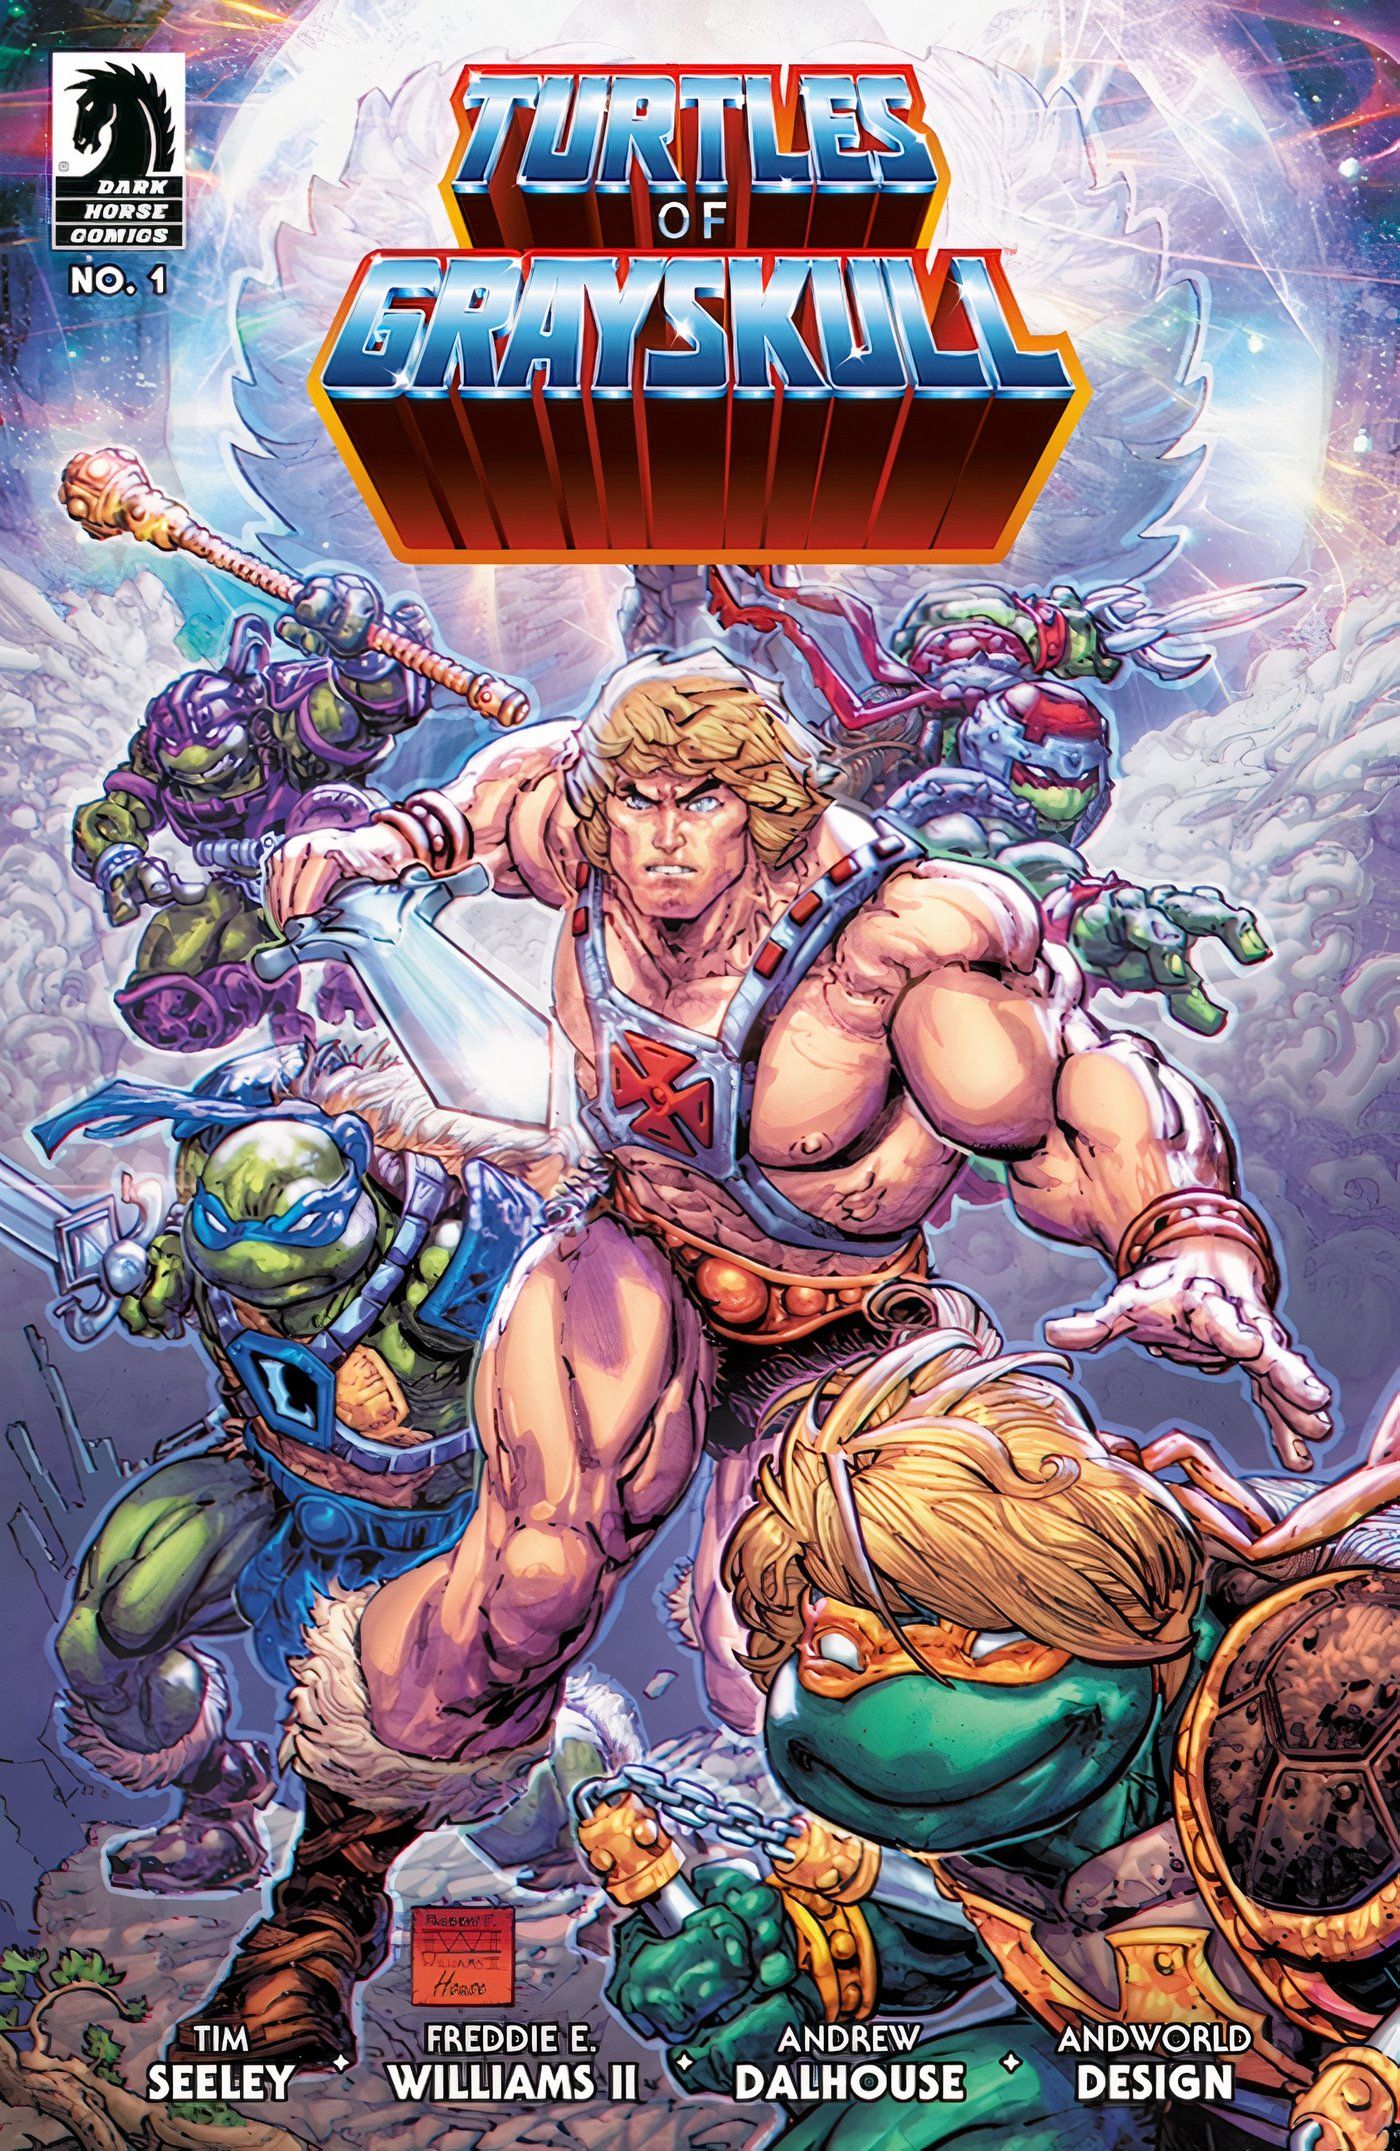 Turtles of Grayskull Cover 1 featuring He-Man leading the Ninja Turtles into battle.